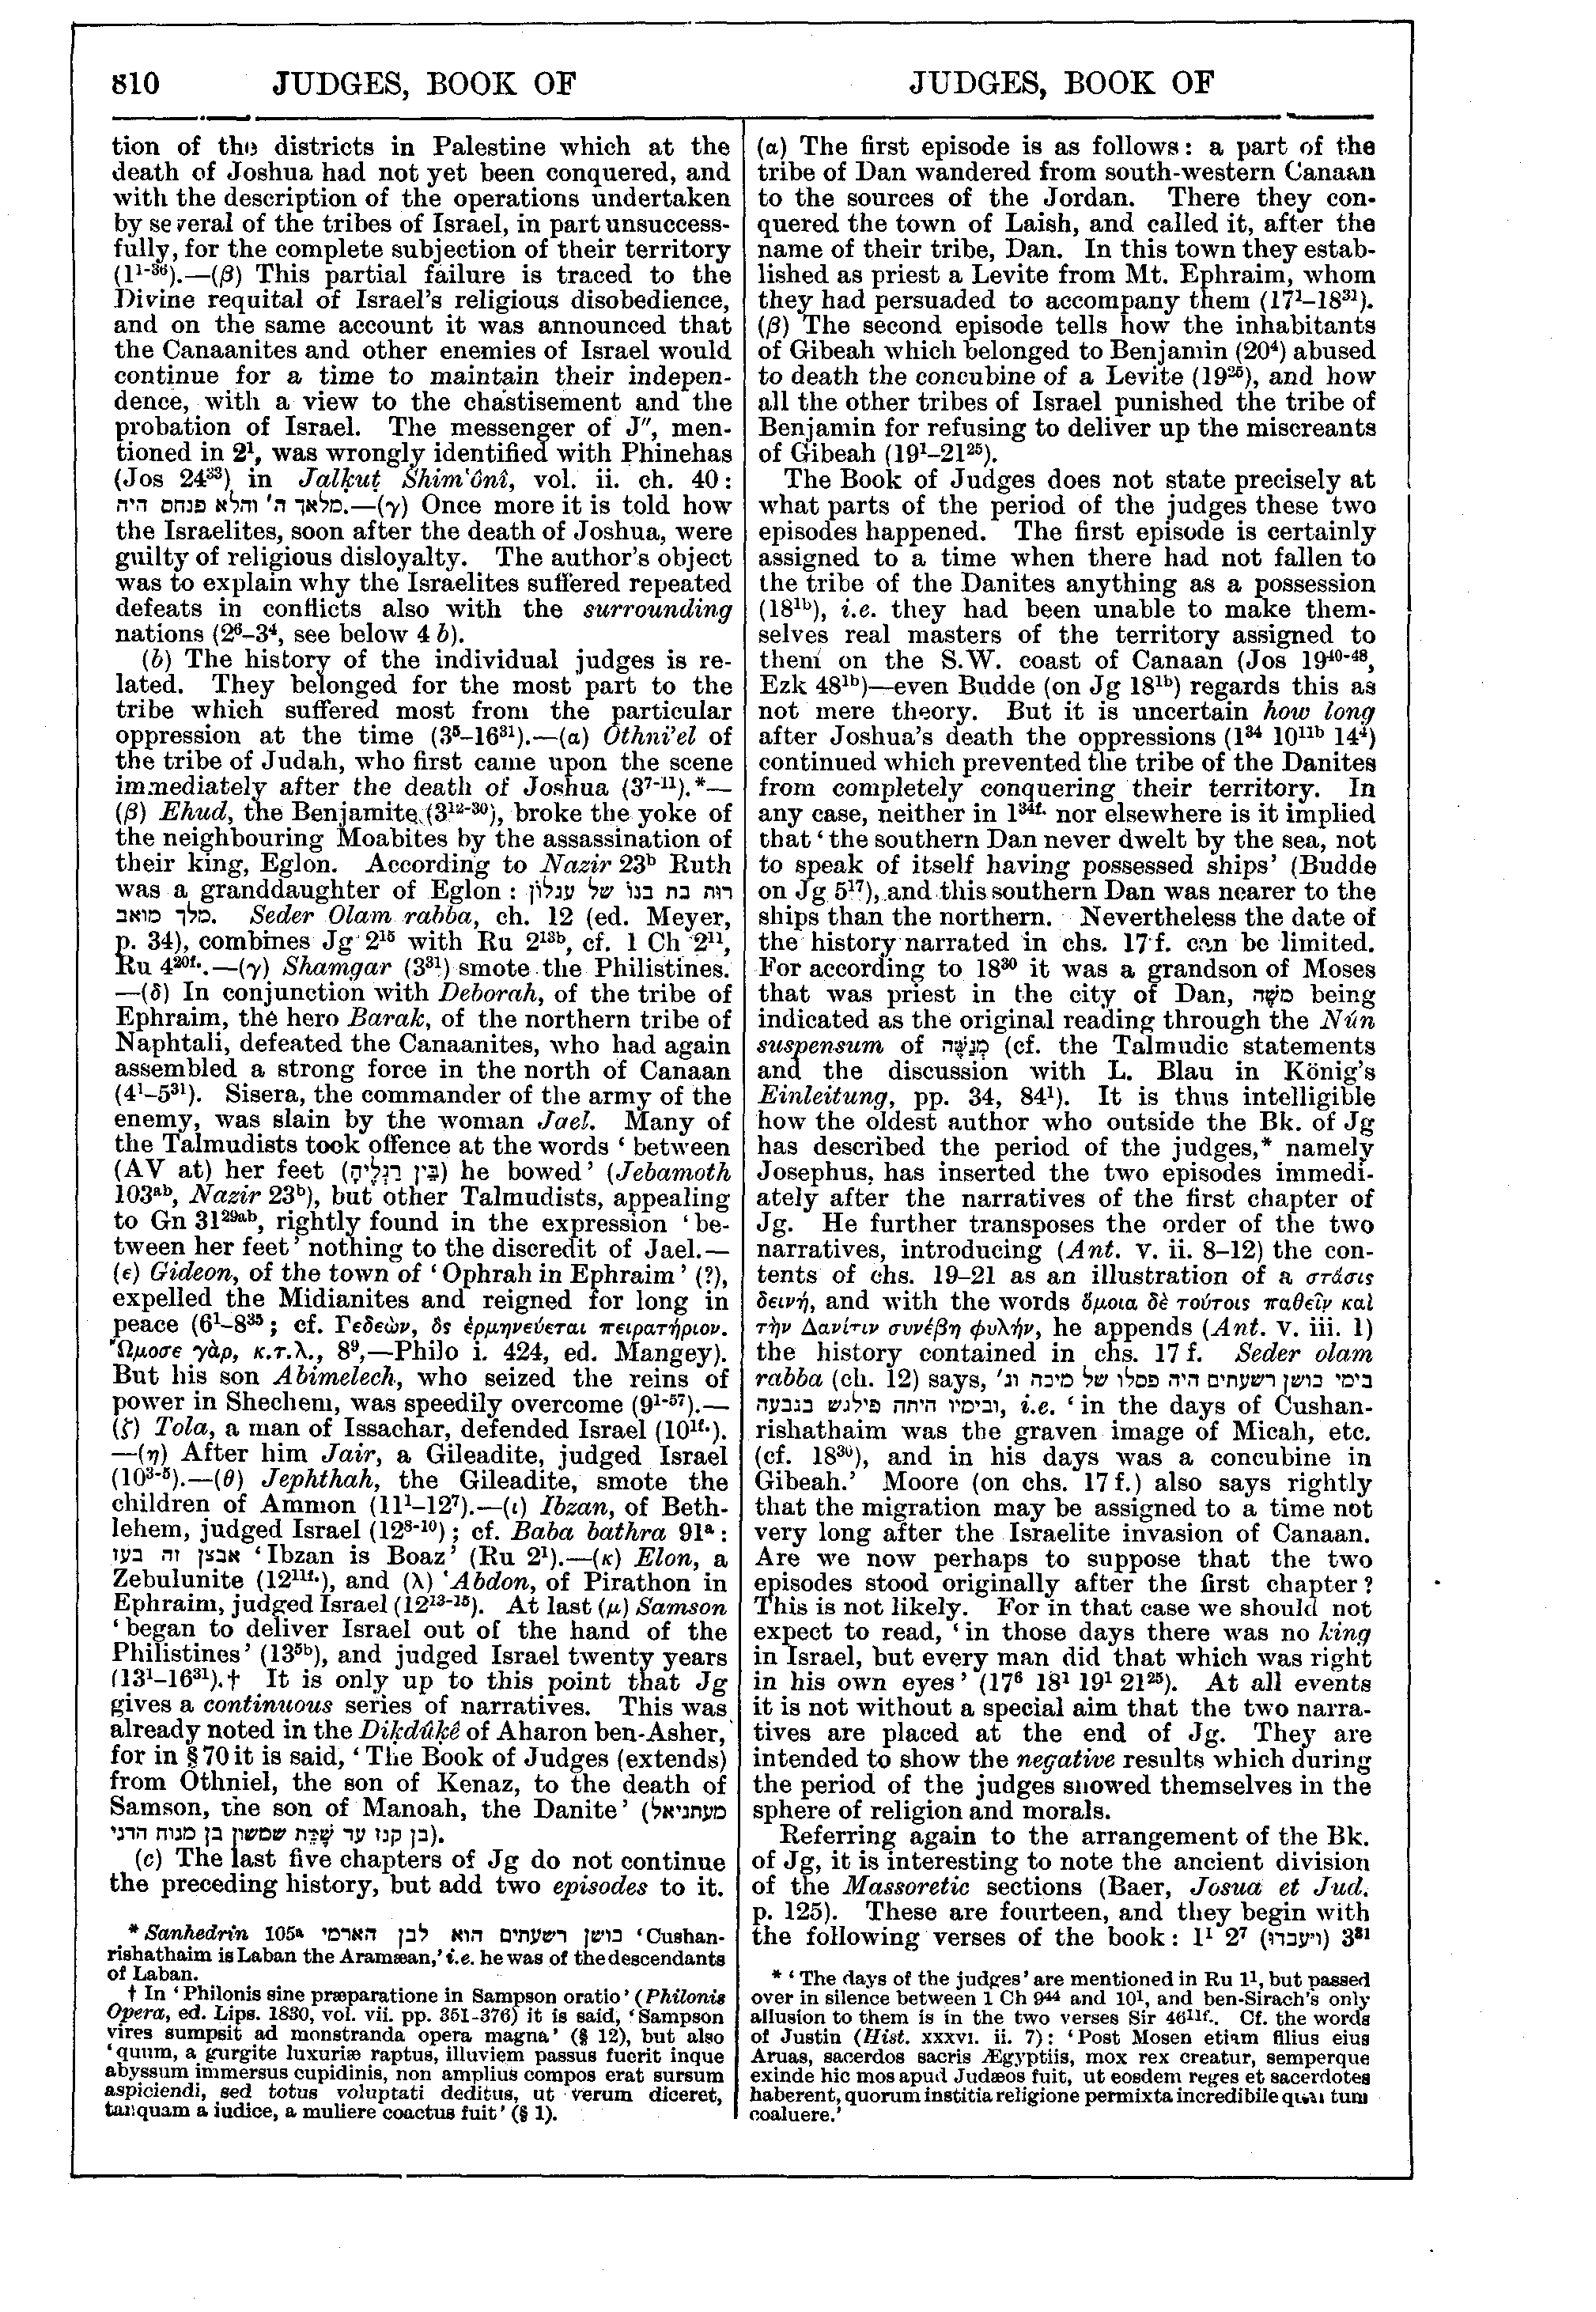 Image of page 810